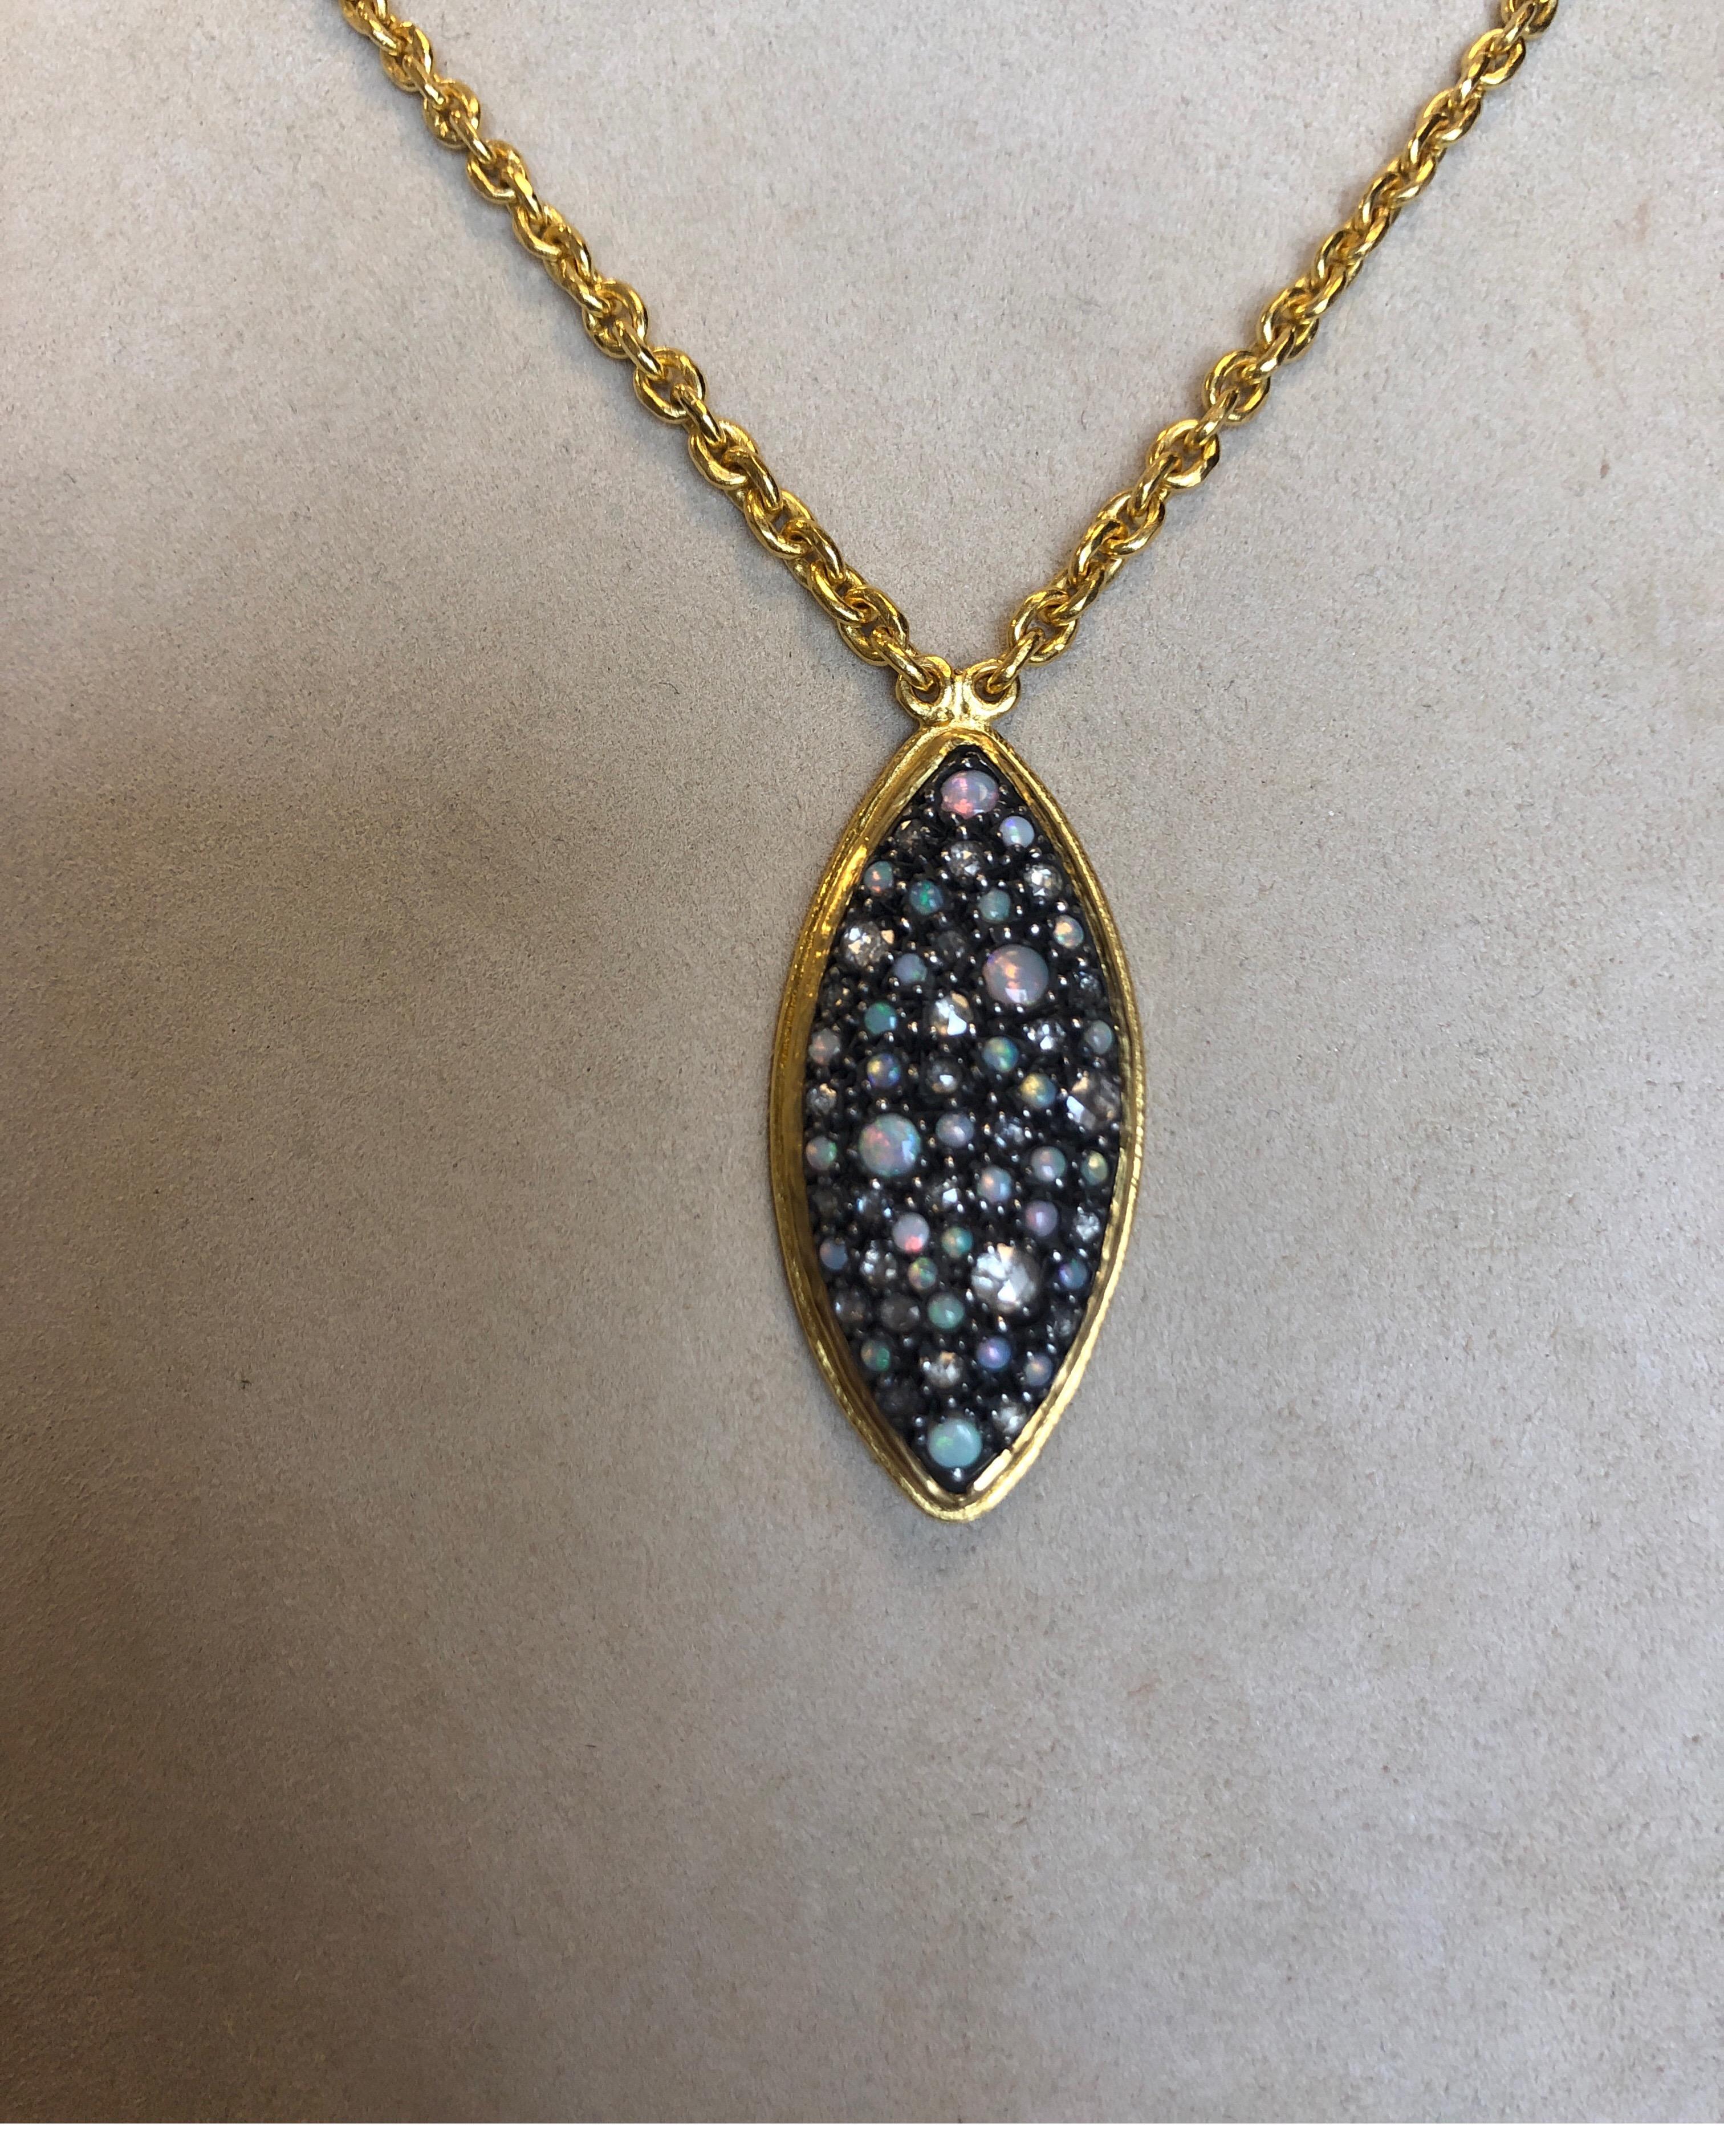 24K yellow gold pendant, prong set with round opals weighing 1ct total and round diamonds weighing 1ct total in a marquise shape in a gold bezel suspended from a 24K yellow gold 18 inch oval link chain, with lobster clasp.
Last retail $7500